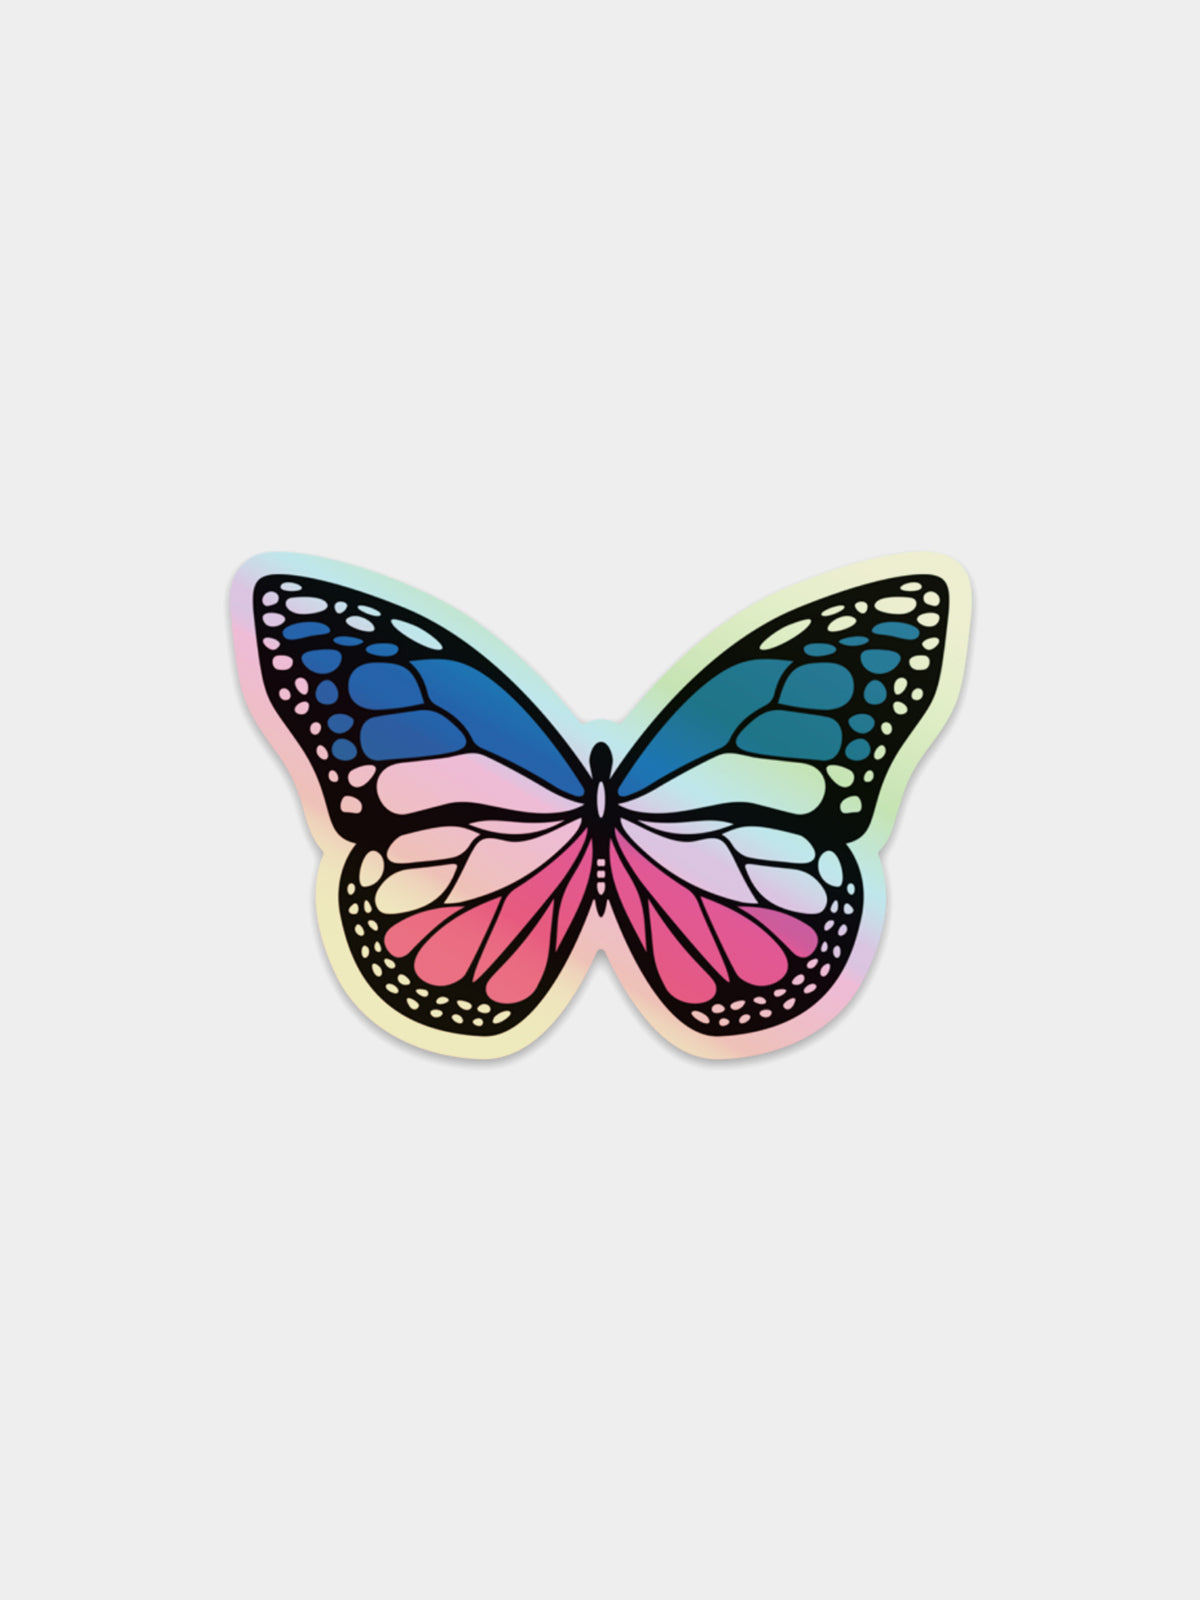 Trans Butterfly Holographic Sticker